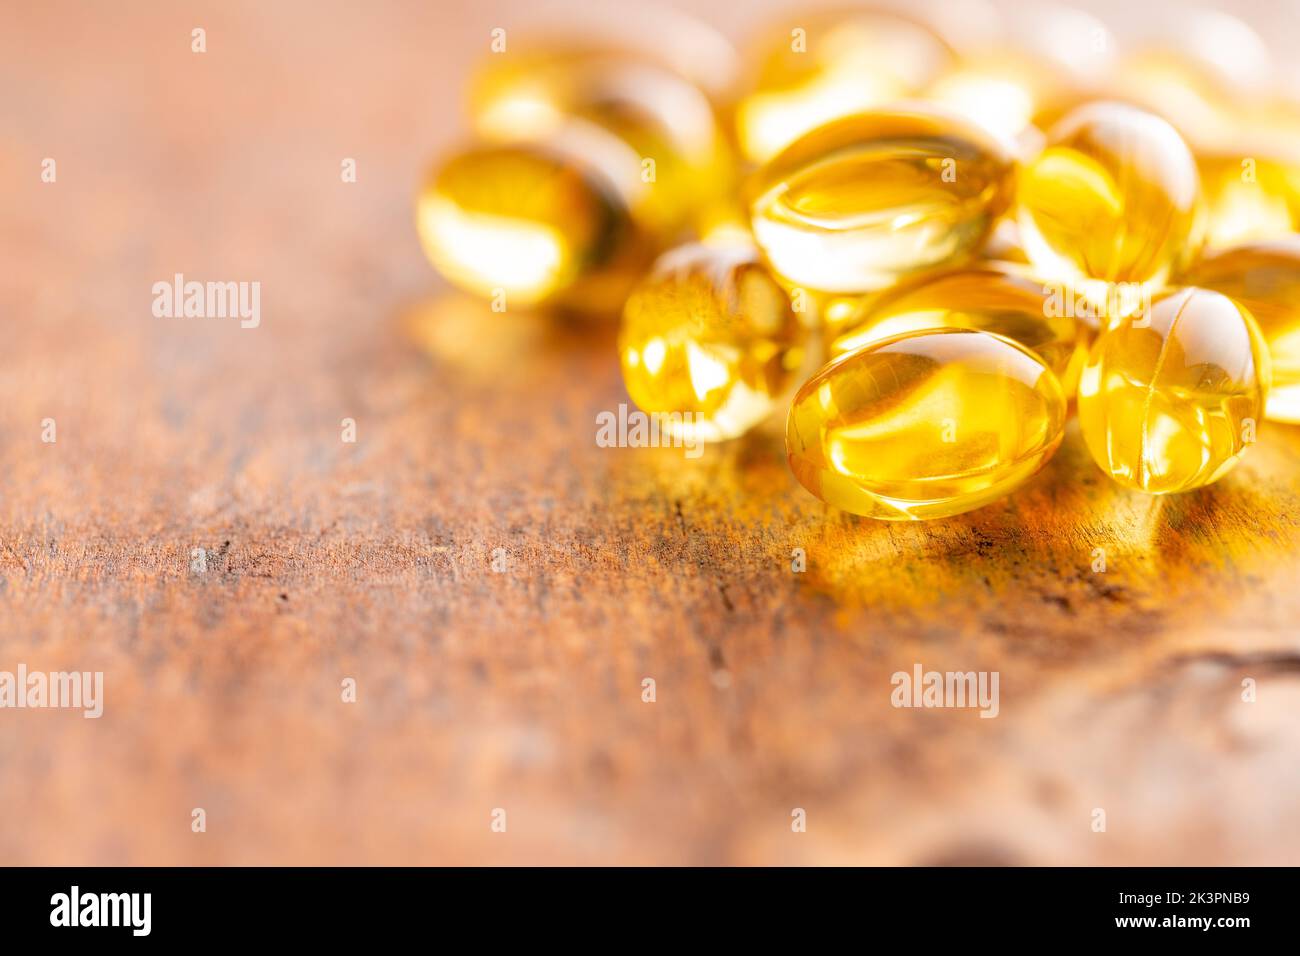 Fish oil capsules. Yellow omega 3 pills on the wooden table. Stock Photo